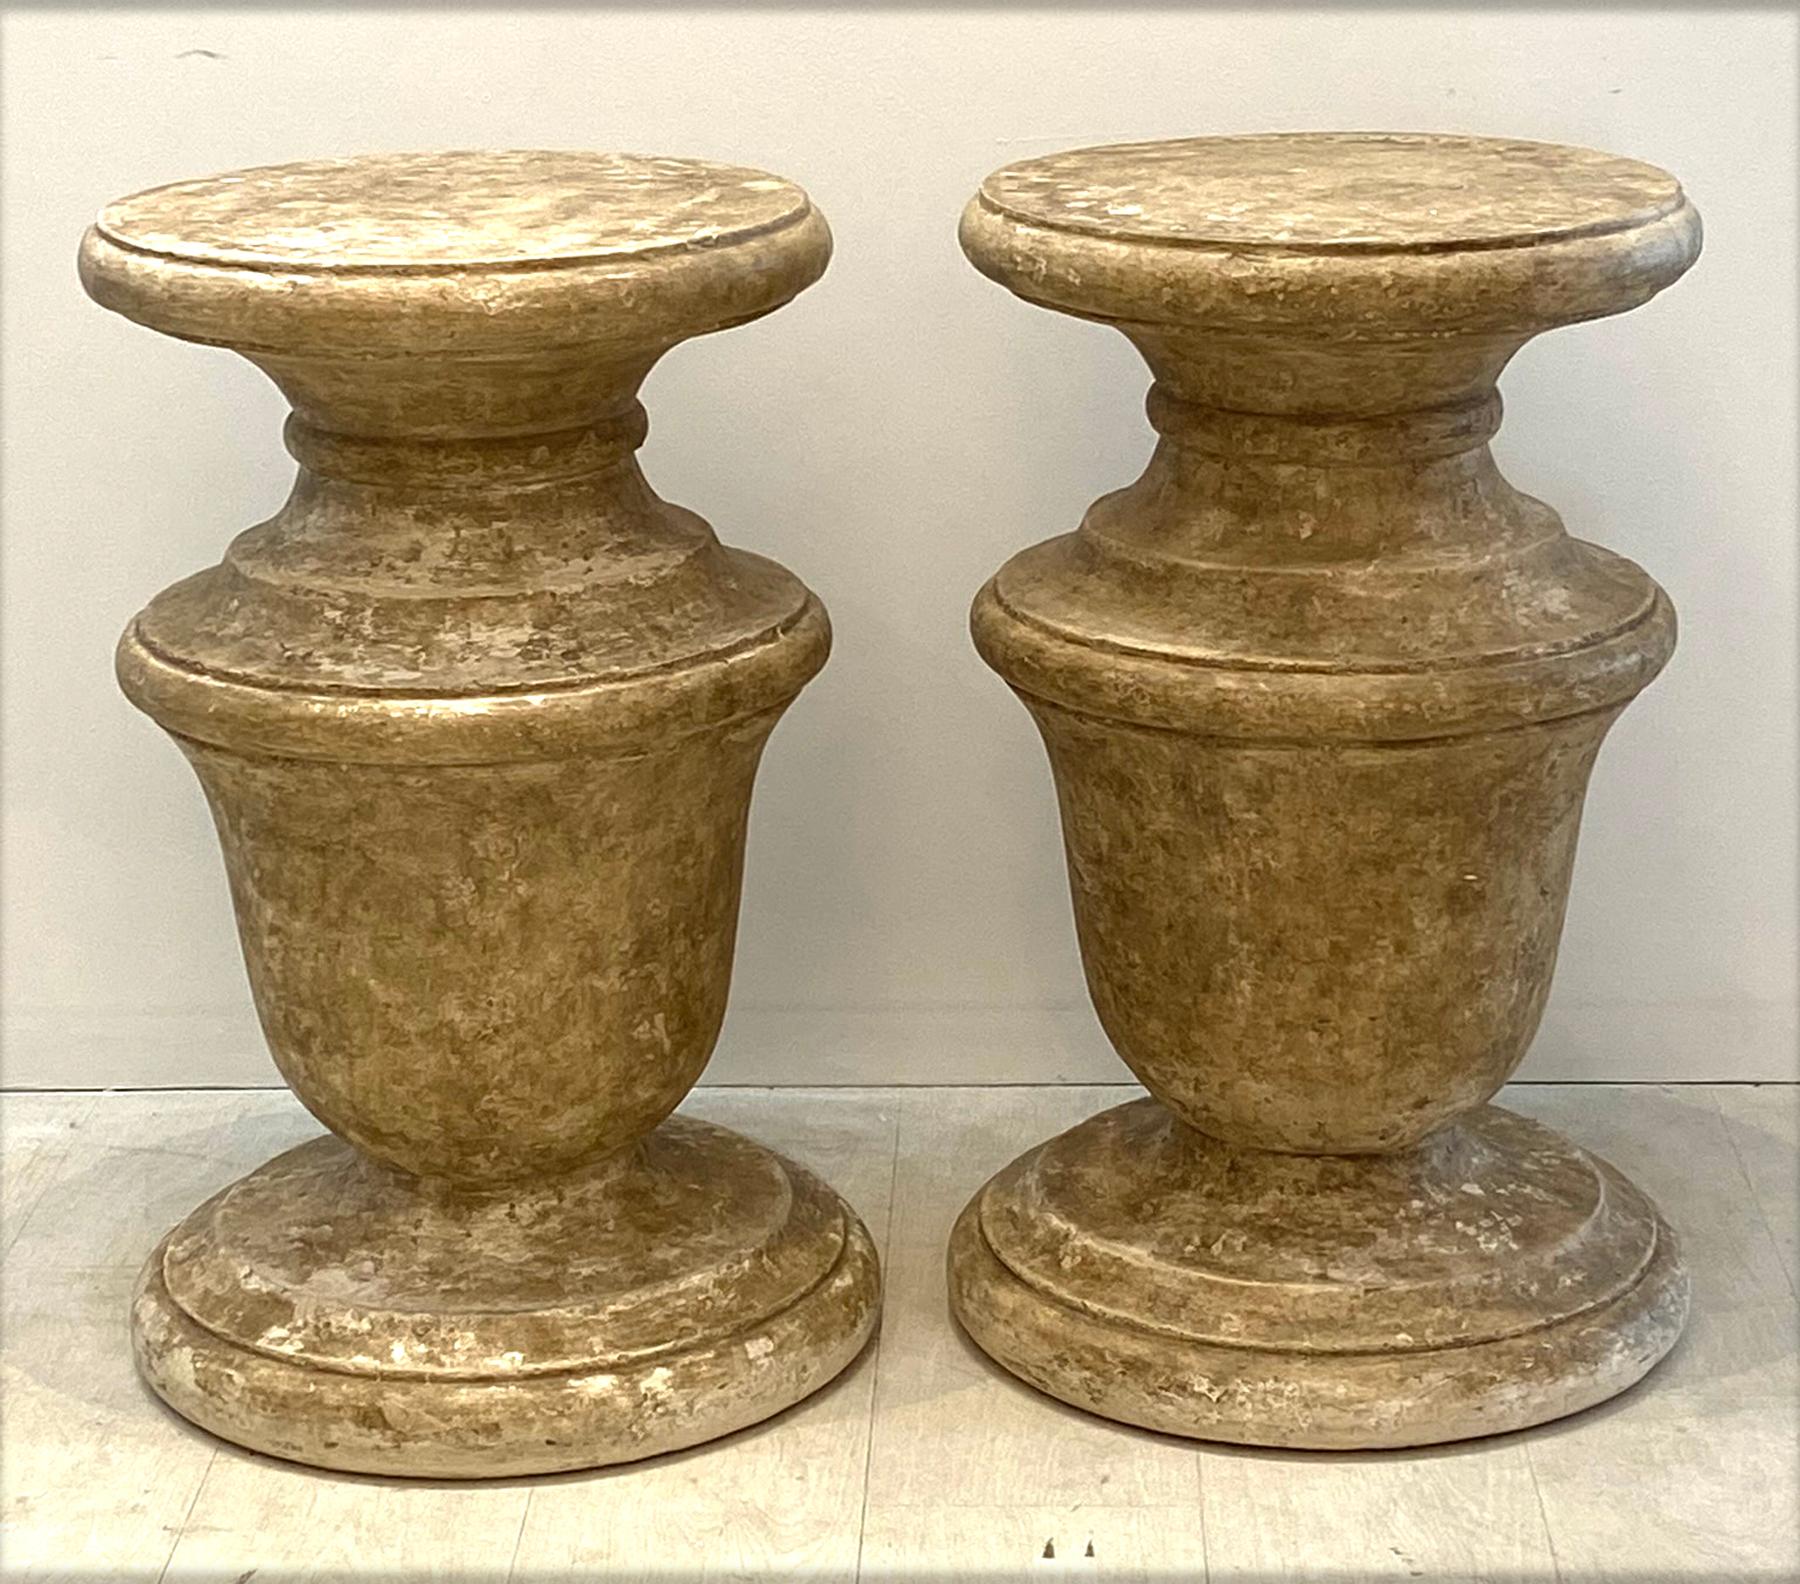 Vintage pair of large decorative plaster round column pedestals with a sponged faux finish.